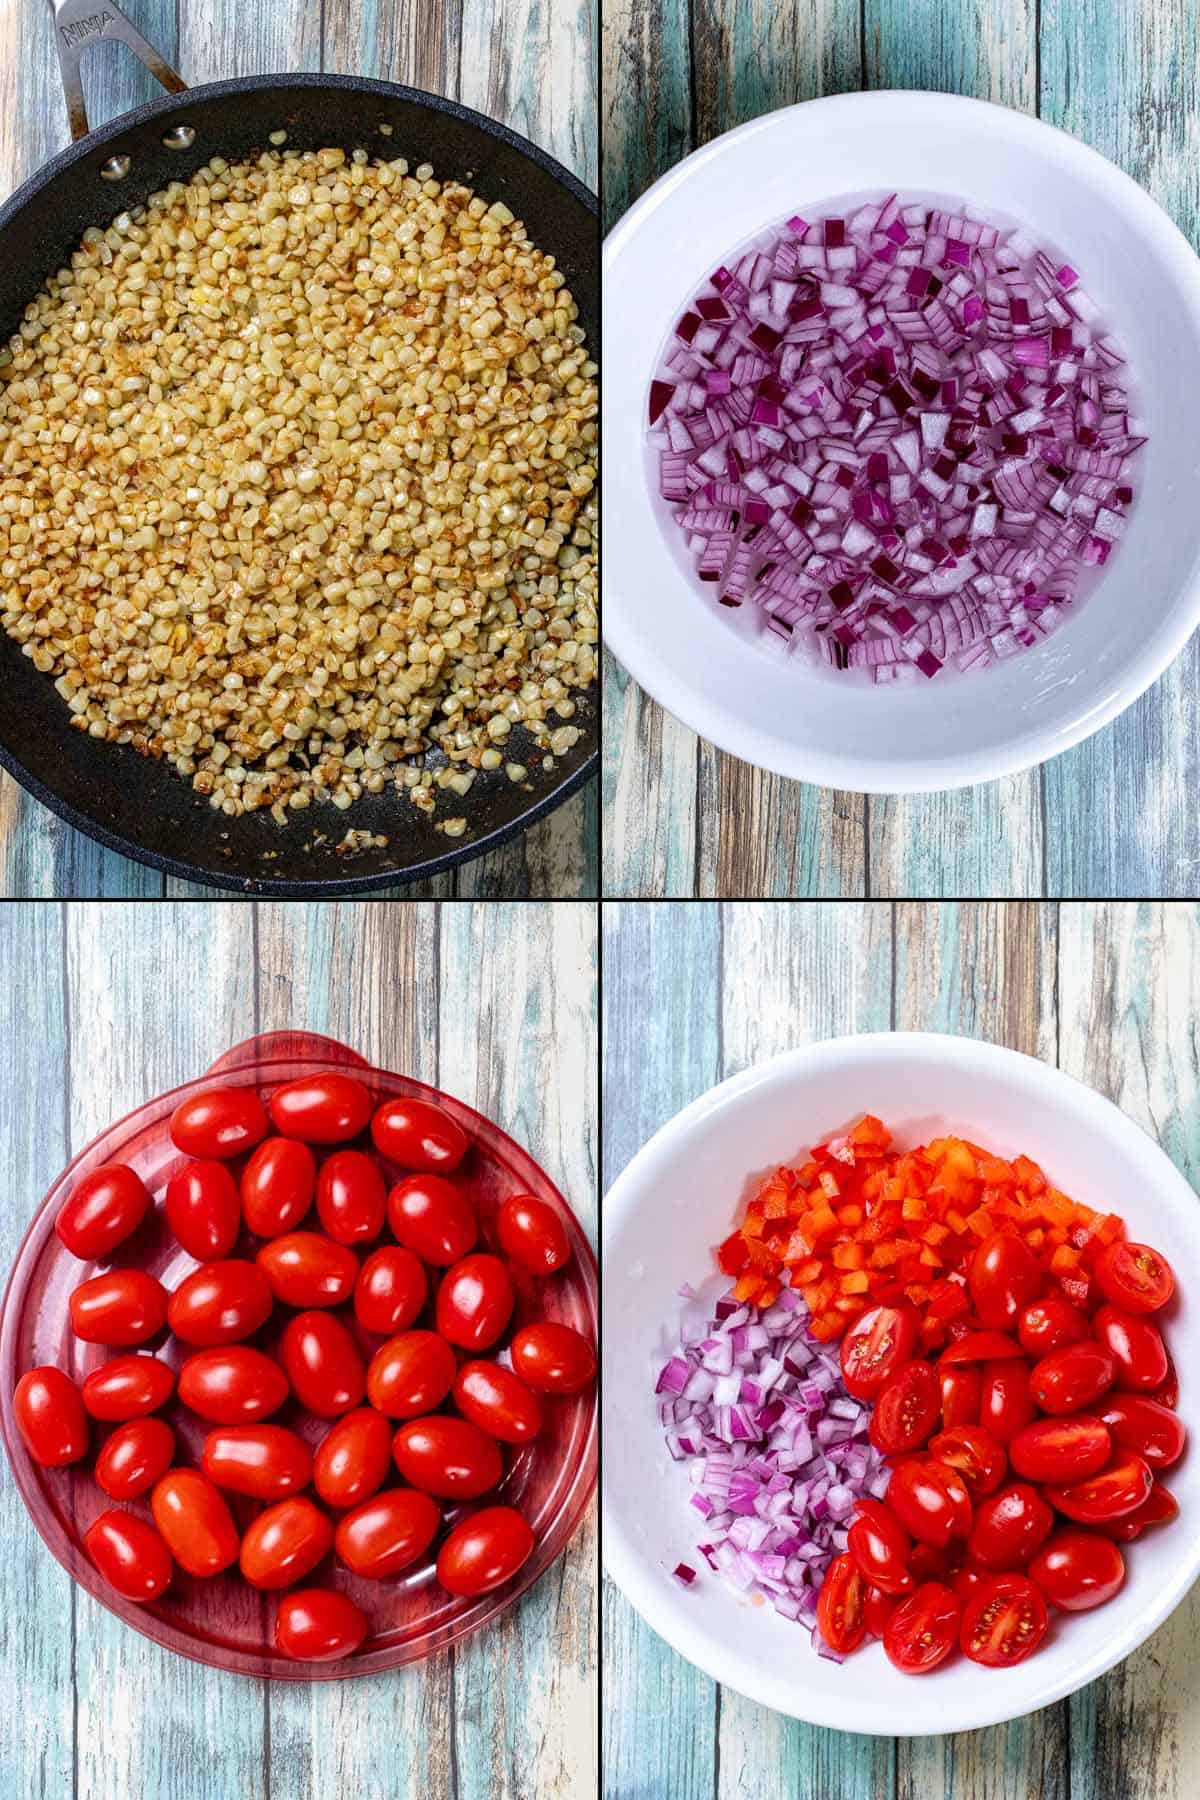 4 images of vegetable prep for corn salad, including roasting corn kernels, soaking diced red onion, slicing grape tomatoes, and setting everything aside.